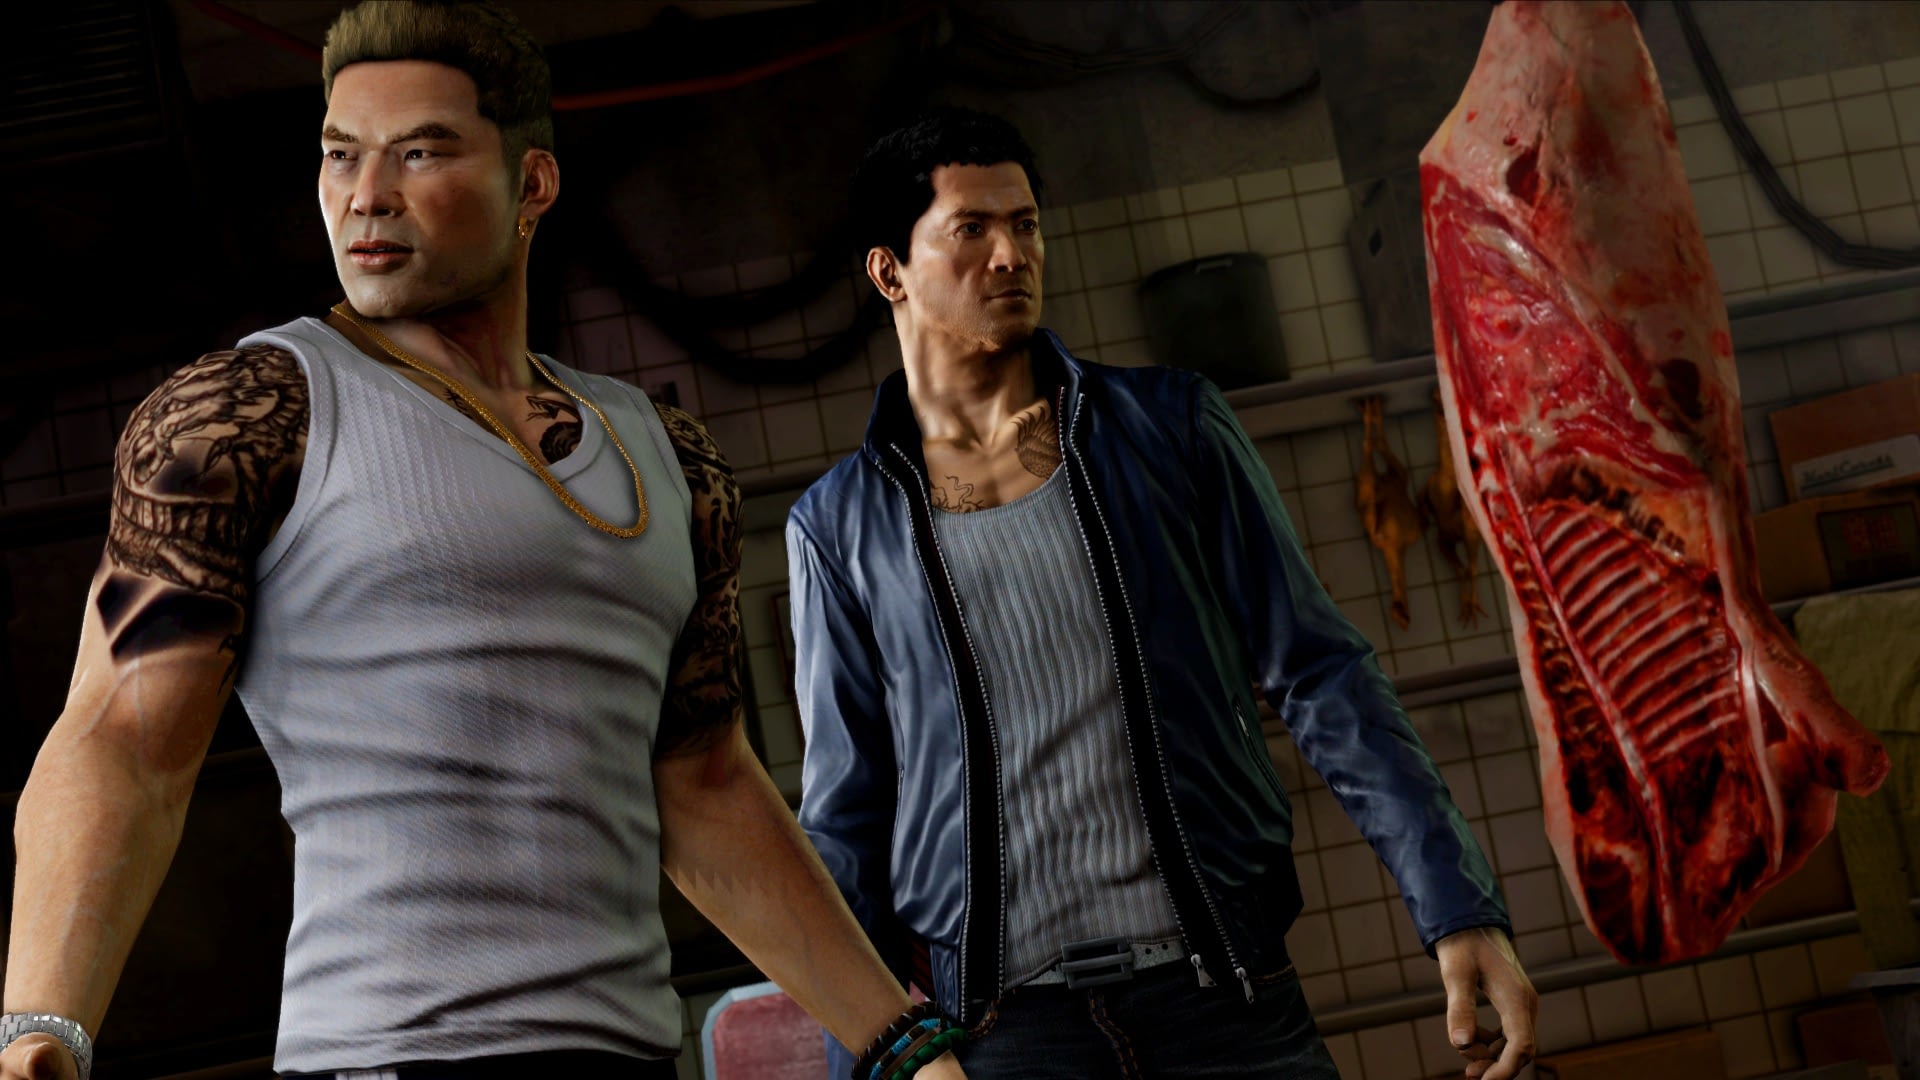 New details on canceled Sleeping Dogs 2 reveal that it would have been